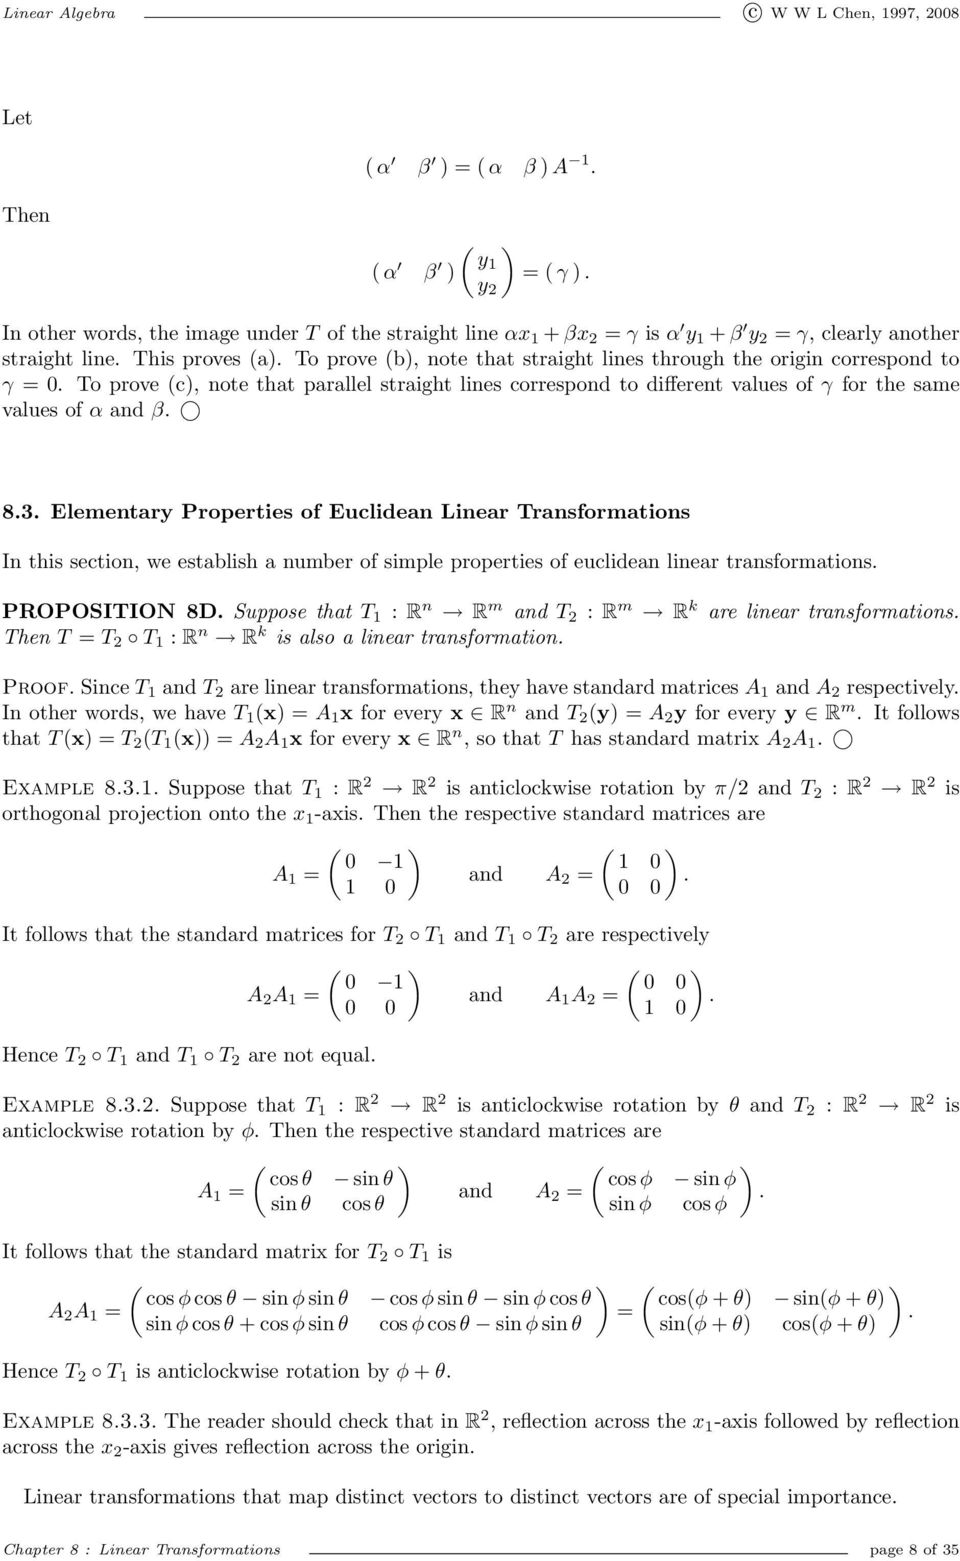 Euclidean Linear Transformations In this section, we establish a number of simple properties of euclidean linear transformations PROPOSITION 8D Suppose that T 1 : R n R m and T 2 : R m R k are linear